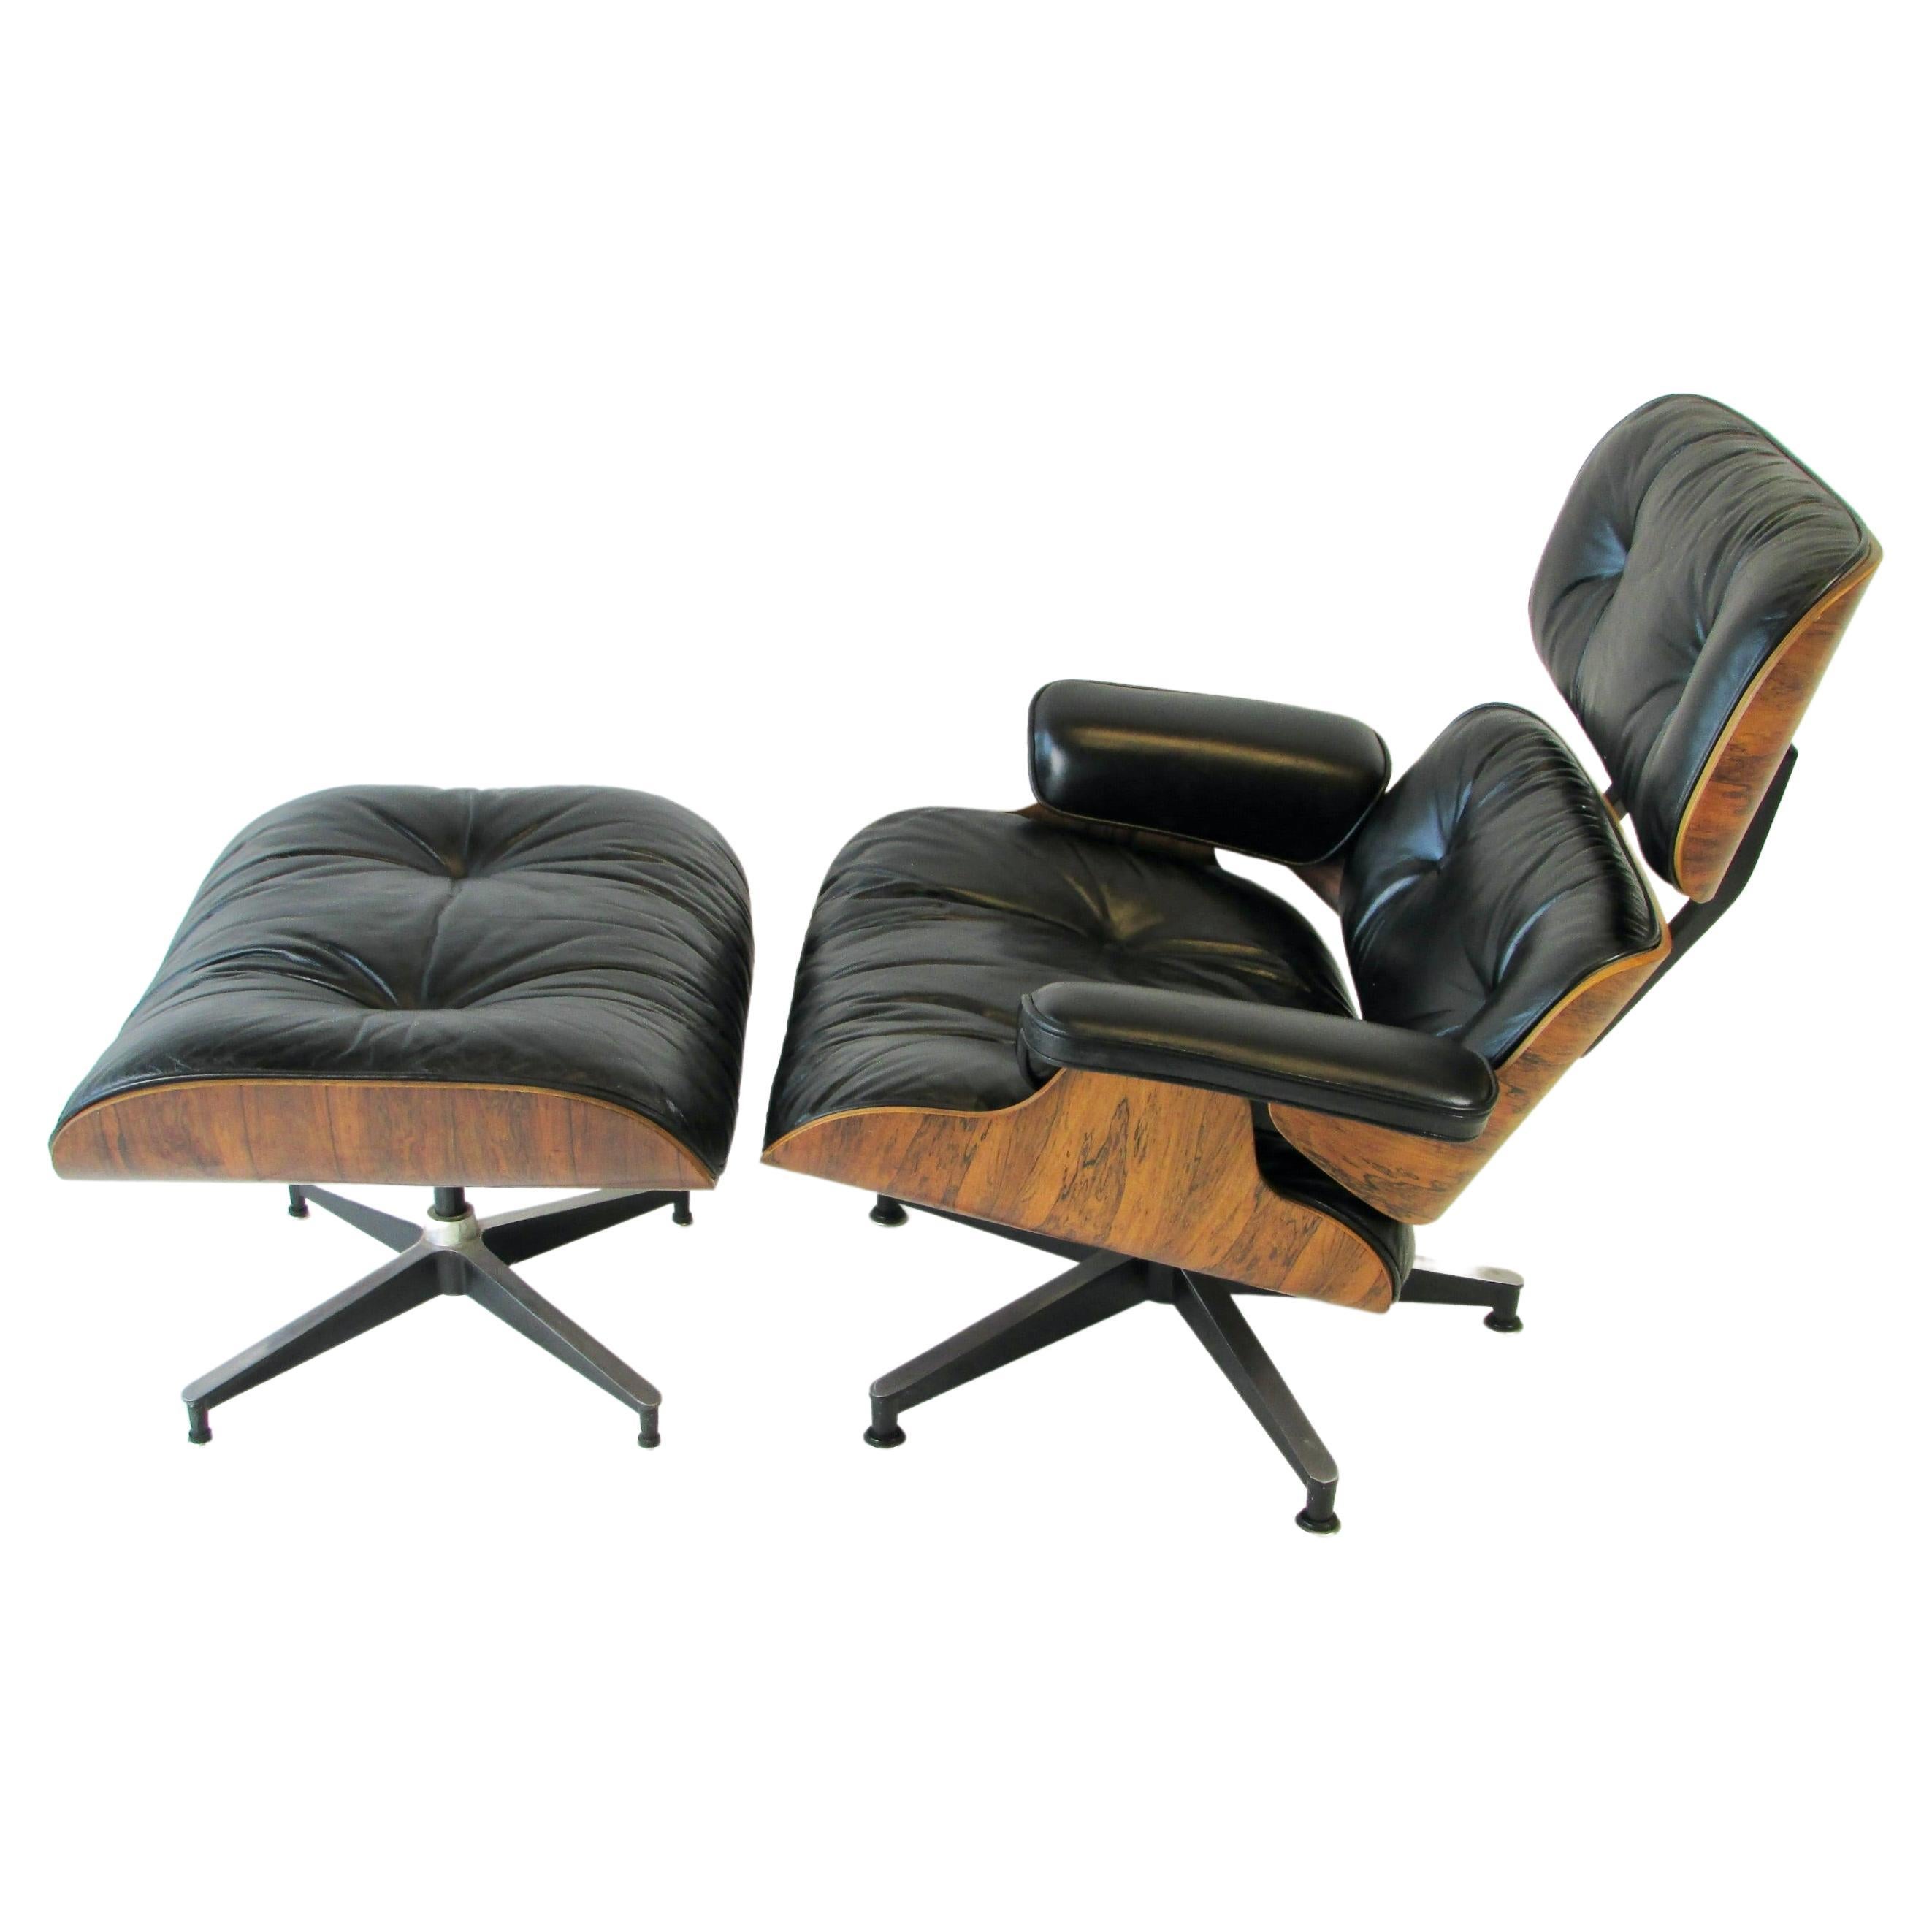 Beautifully Grained Eames Herman Miller Rosewood 670 671 Lounge Chair Ottoman